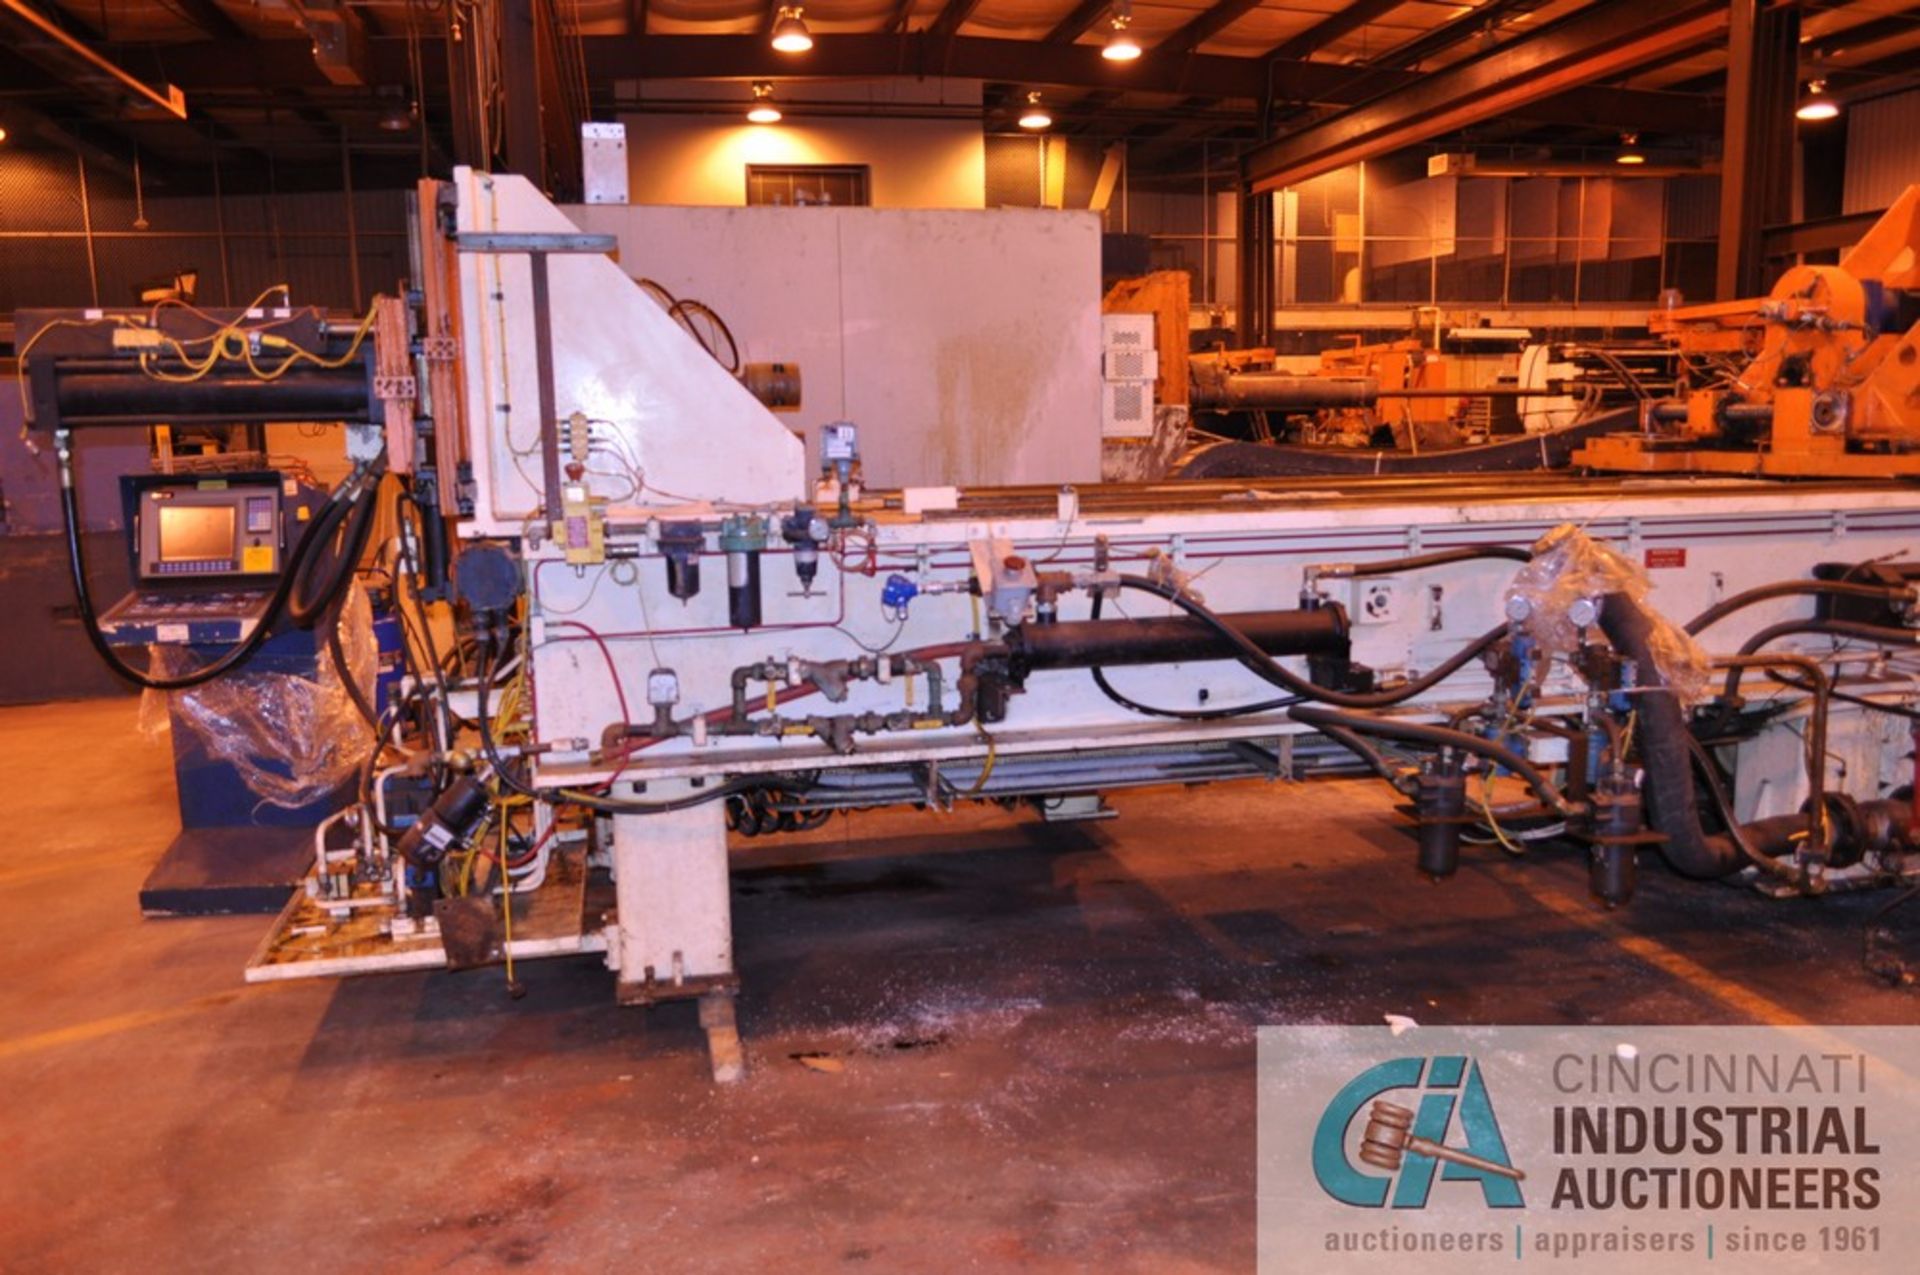 6" EAGLE EPT-150 CNC HYDRAULIC TUBE BENDER; S/N 96-979, DOUBLE STACKING TOOLS, .170" MAX WALL, 6" - Image 2 of 11